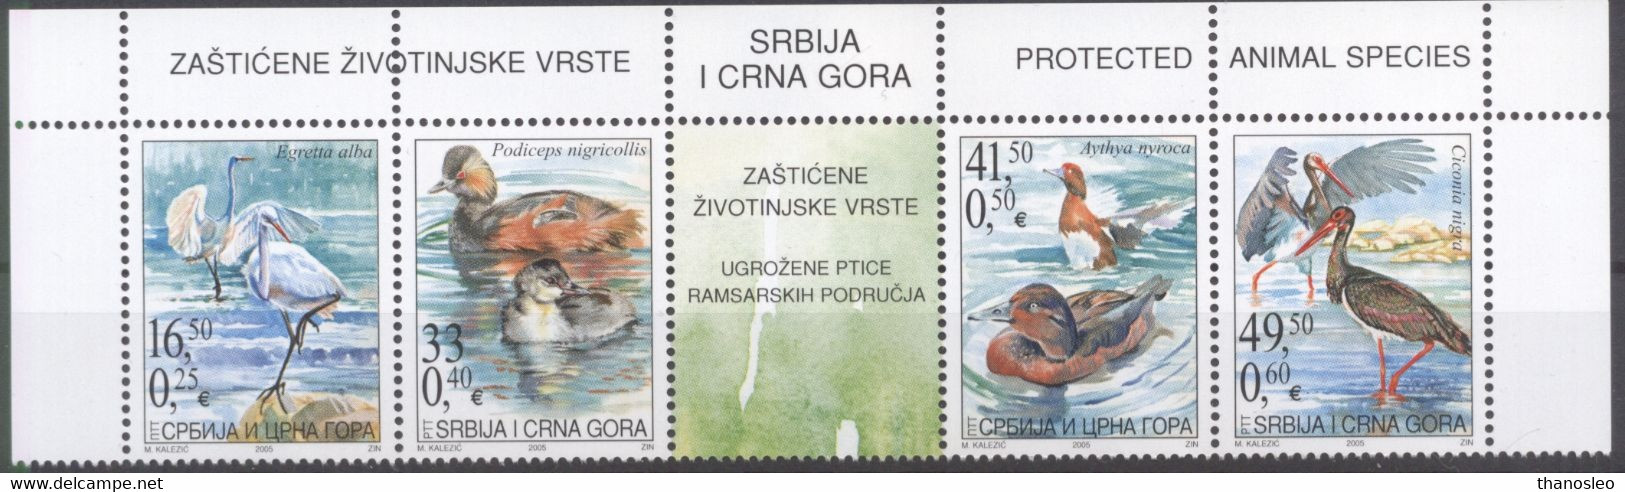 Serbia And Montenegro 2005  Protected Animal Species MNH VF - Serbien